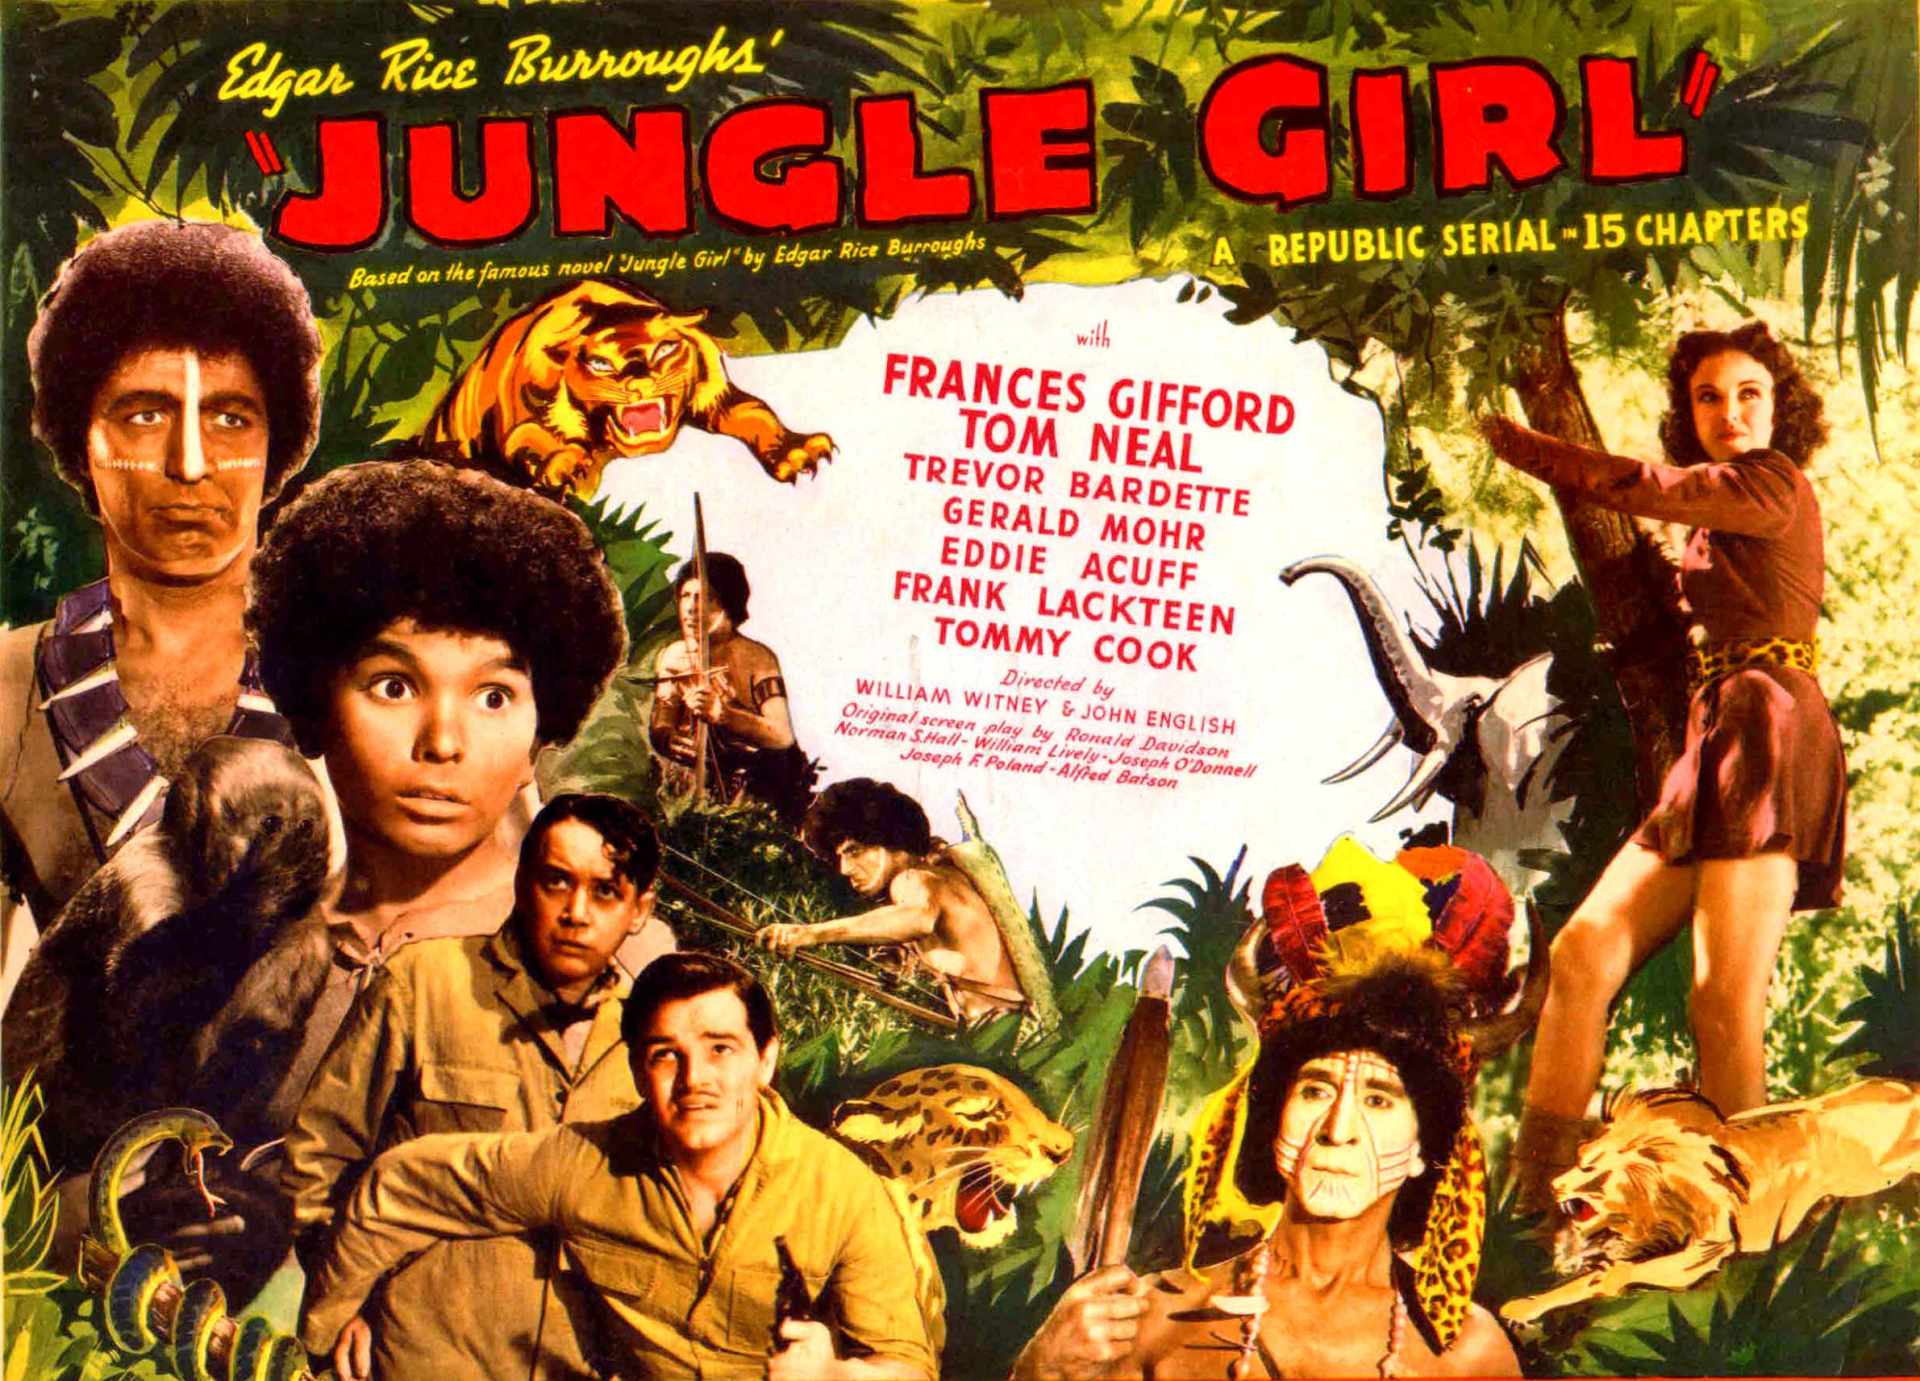 Jungle Girl (1941) complete serial. Includes commentary, and tribute to Frances Gifford.